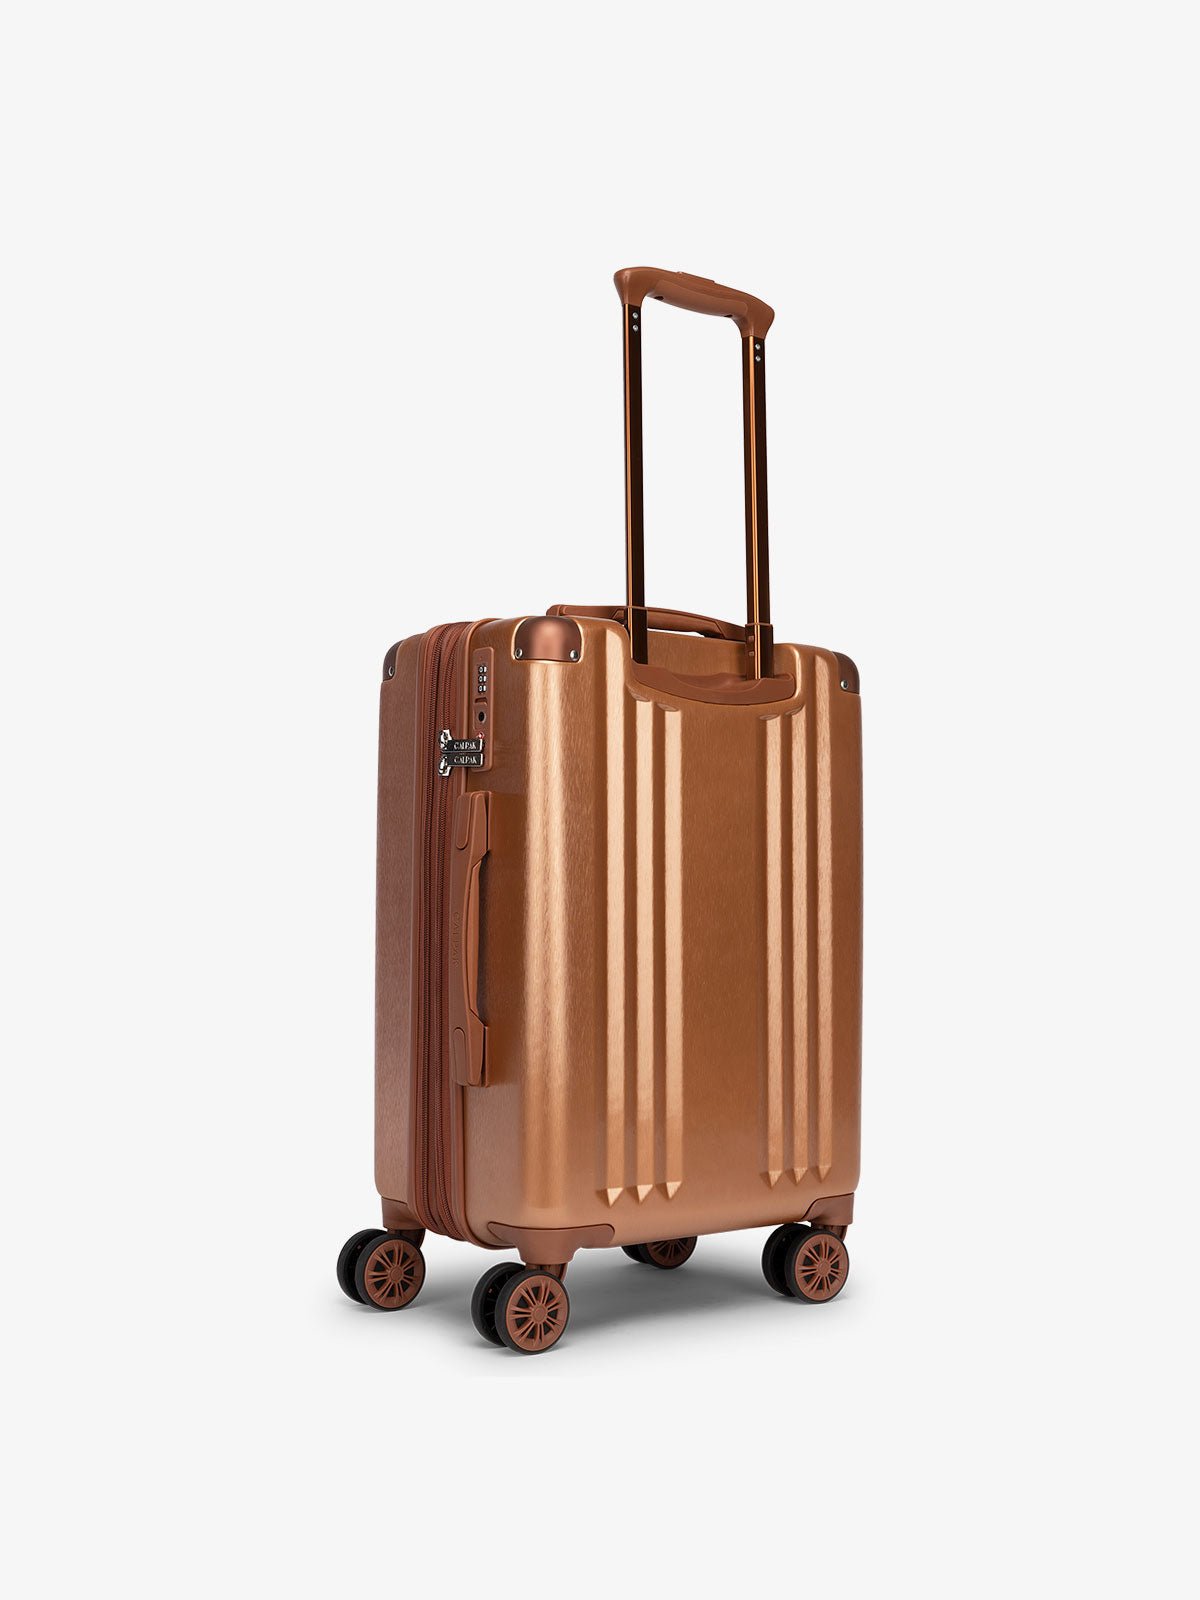 CALPAK Ambeur lightweight carry-on luggage with laptop front pocket, TSA lock and 360 spinner wheels in copper